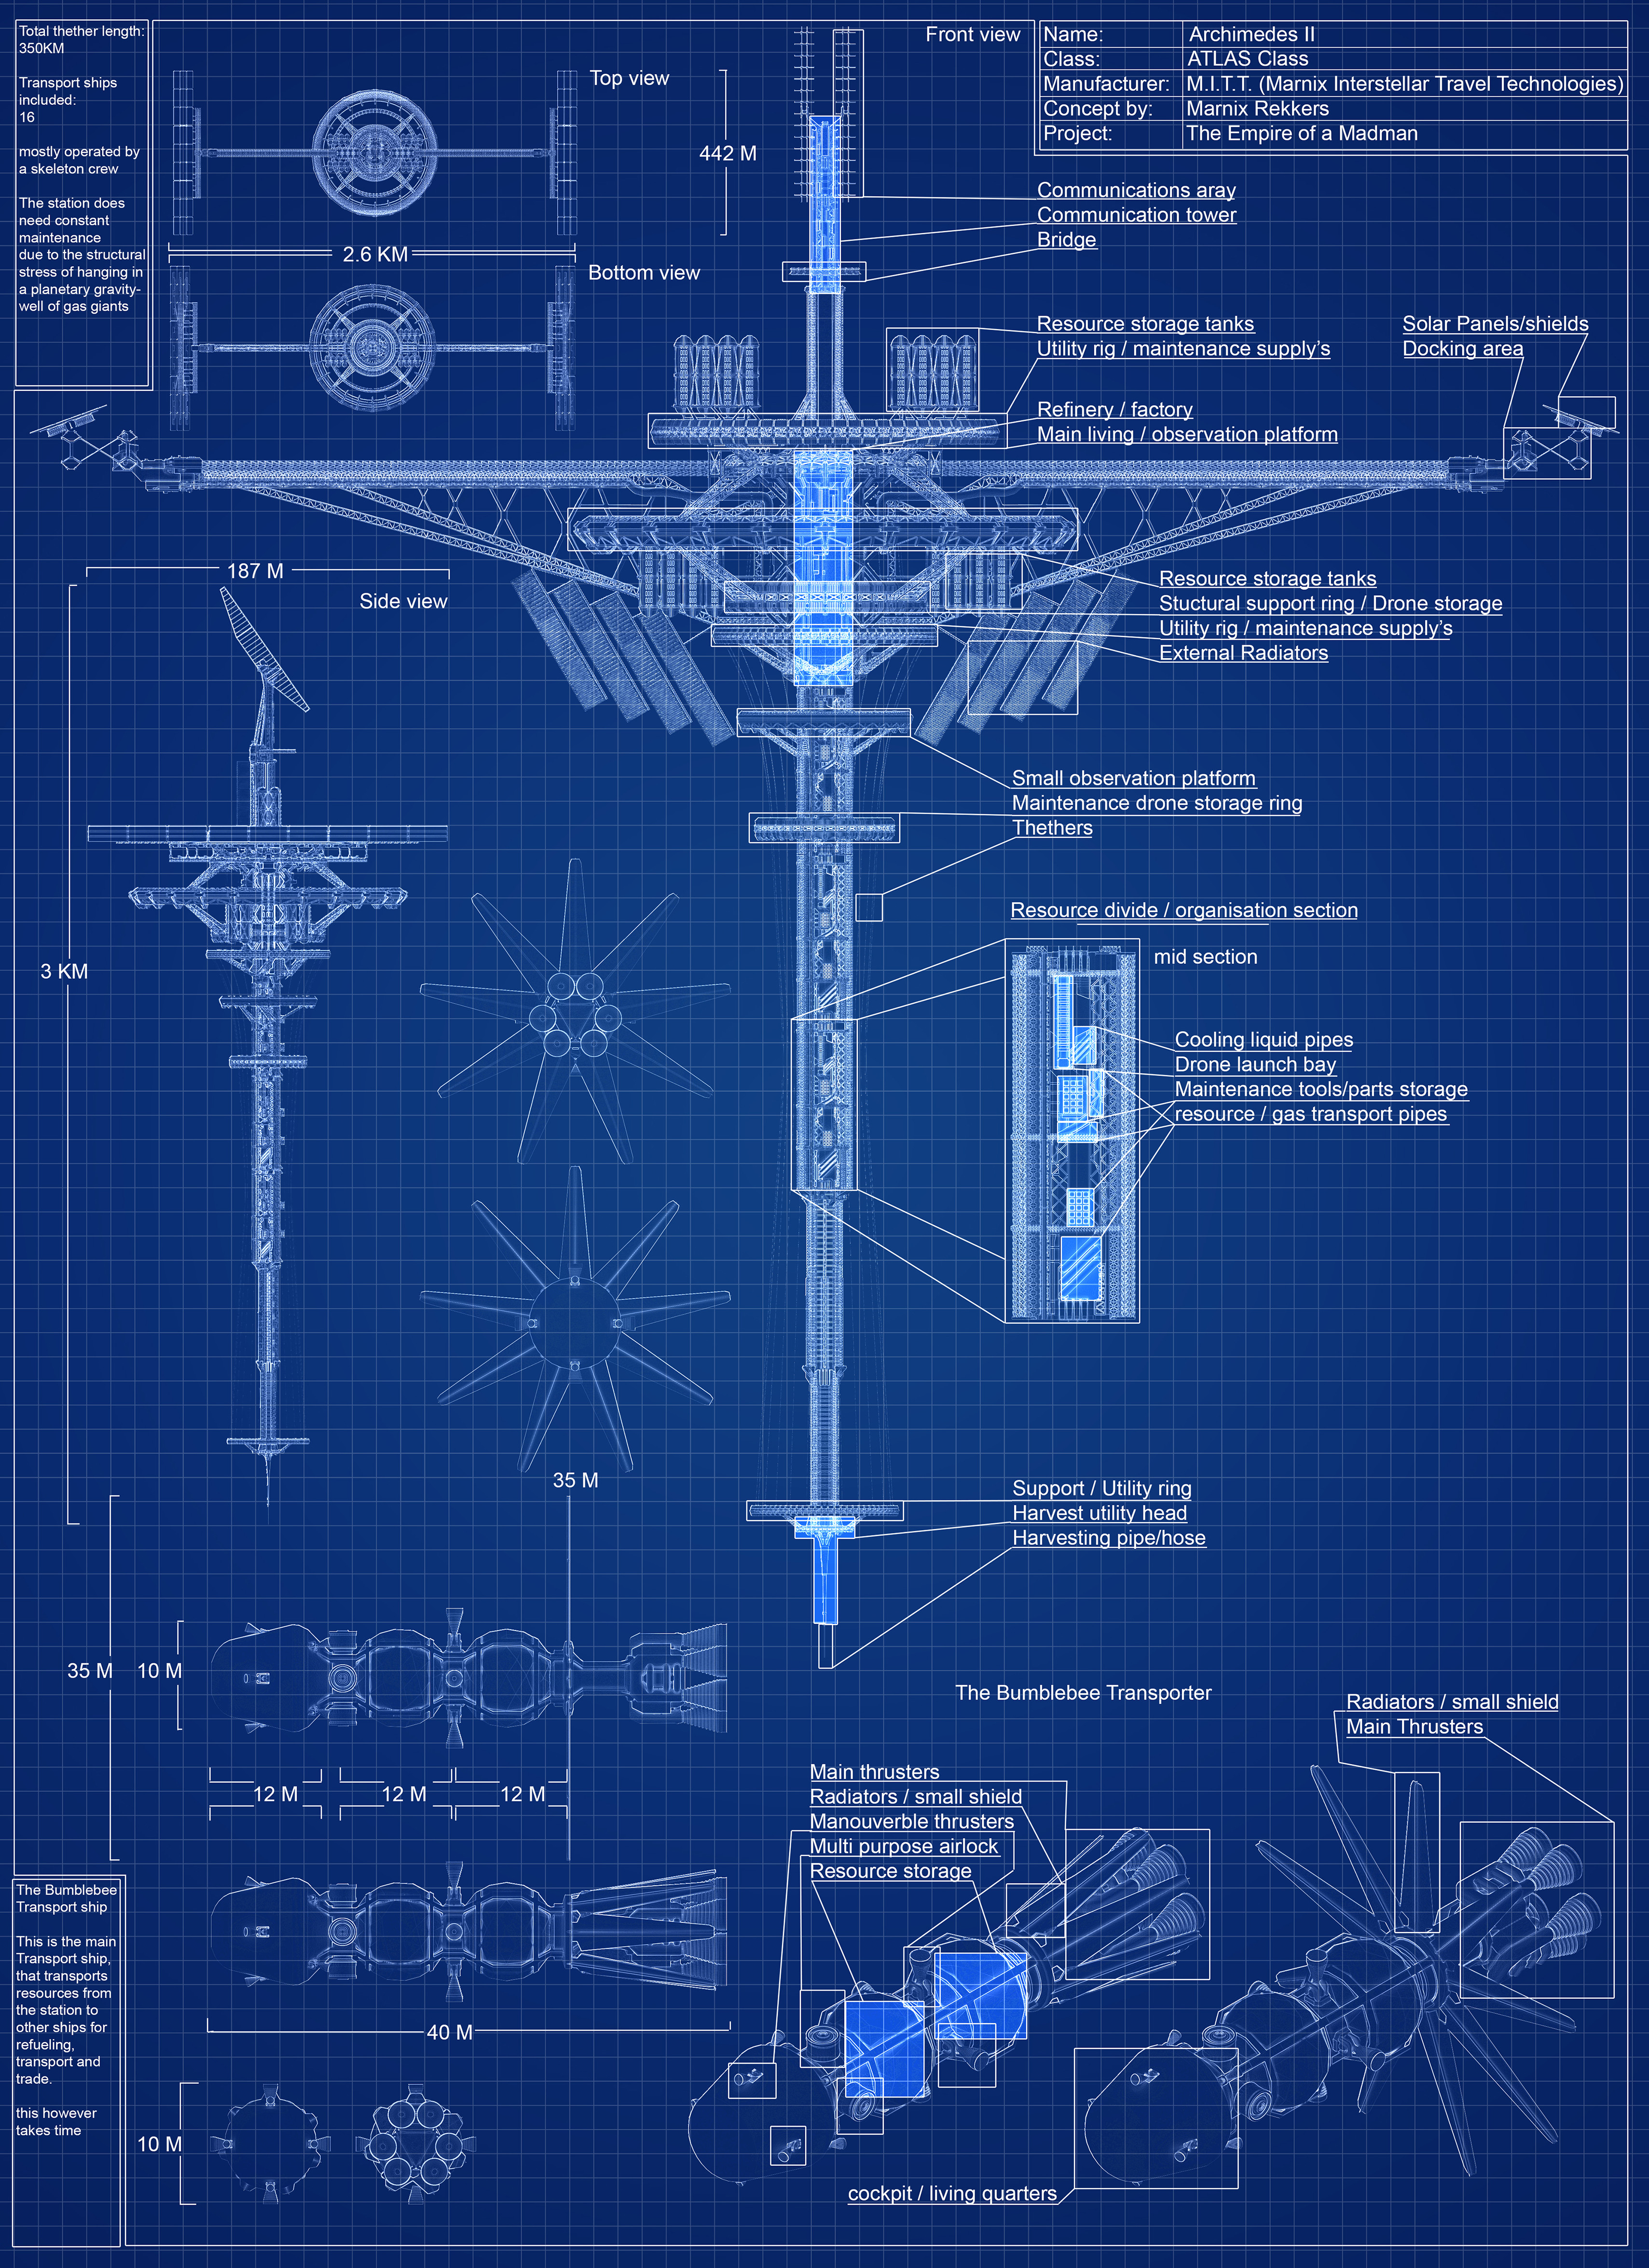 Blueprints of the station